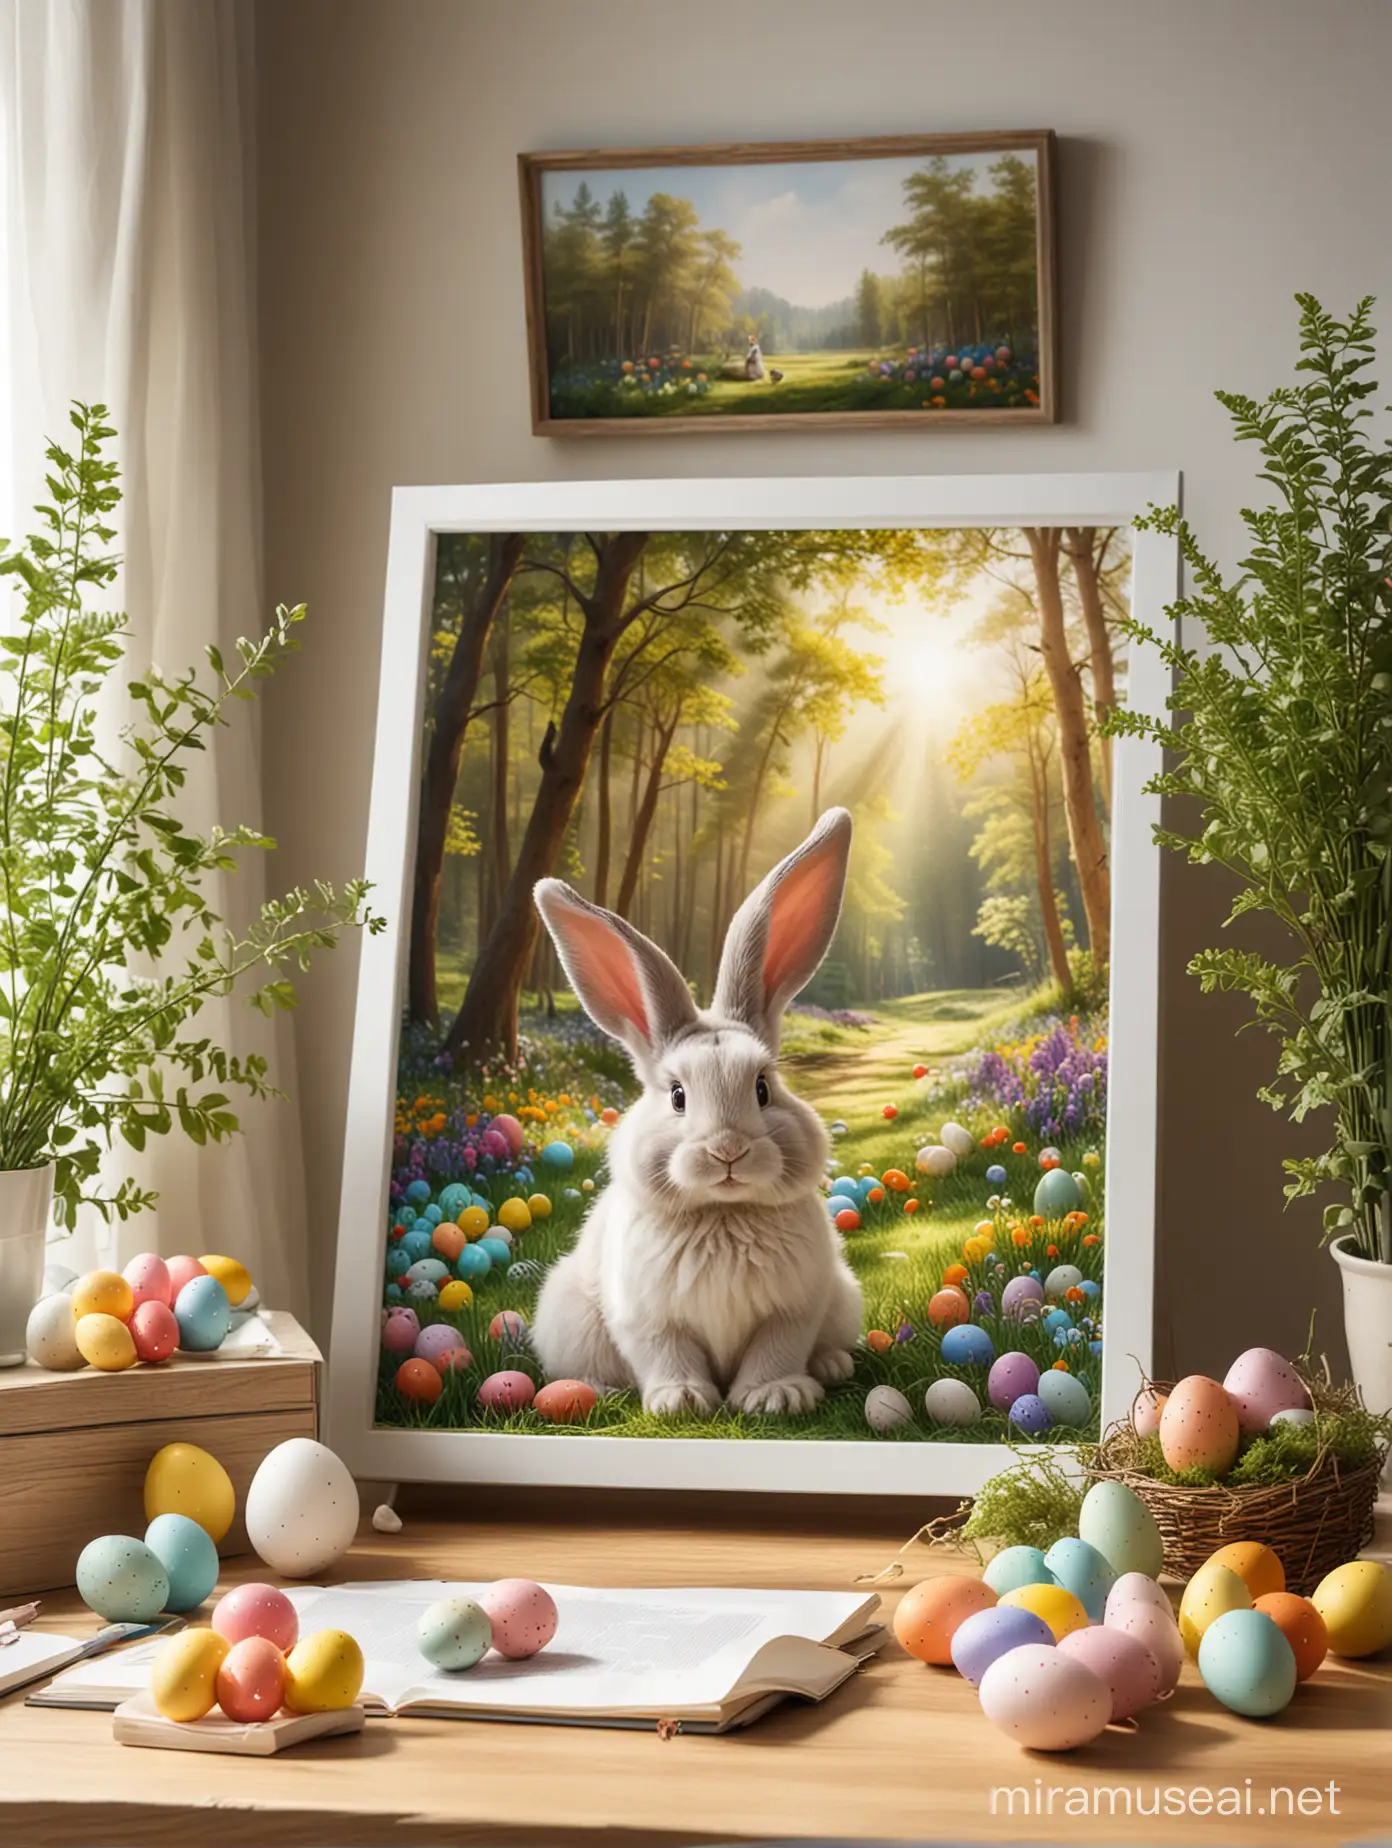 Easter Bunnys Office in the Sunlit Forest Glade with Colorful Eggs